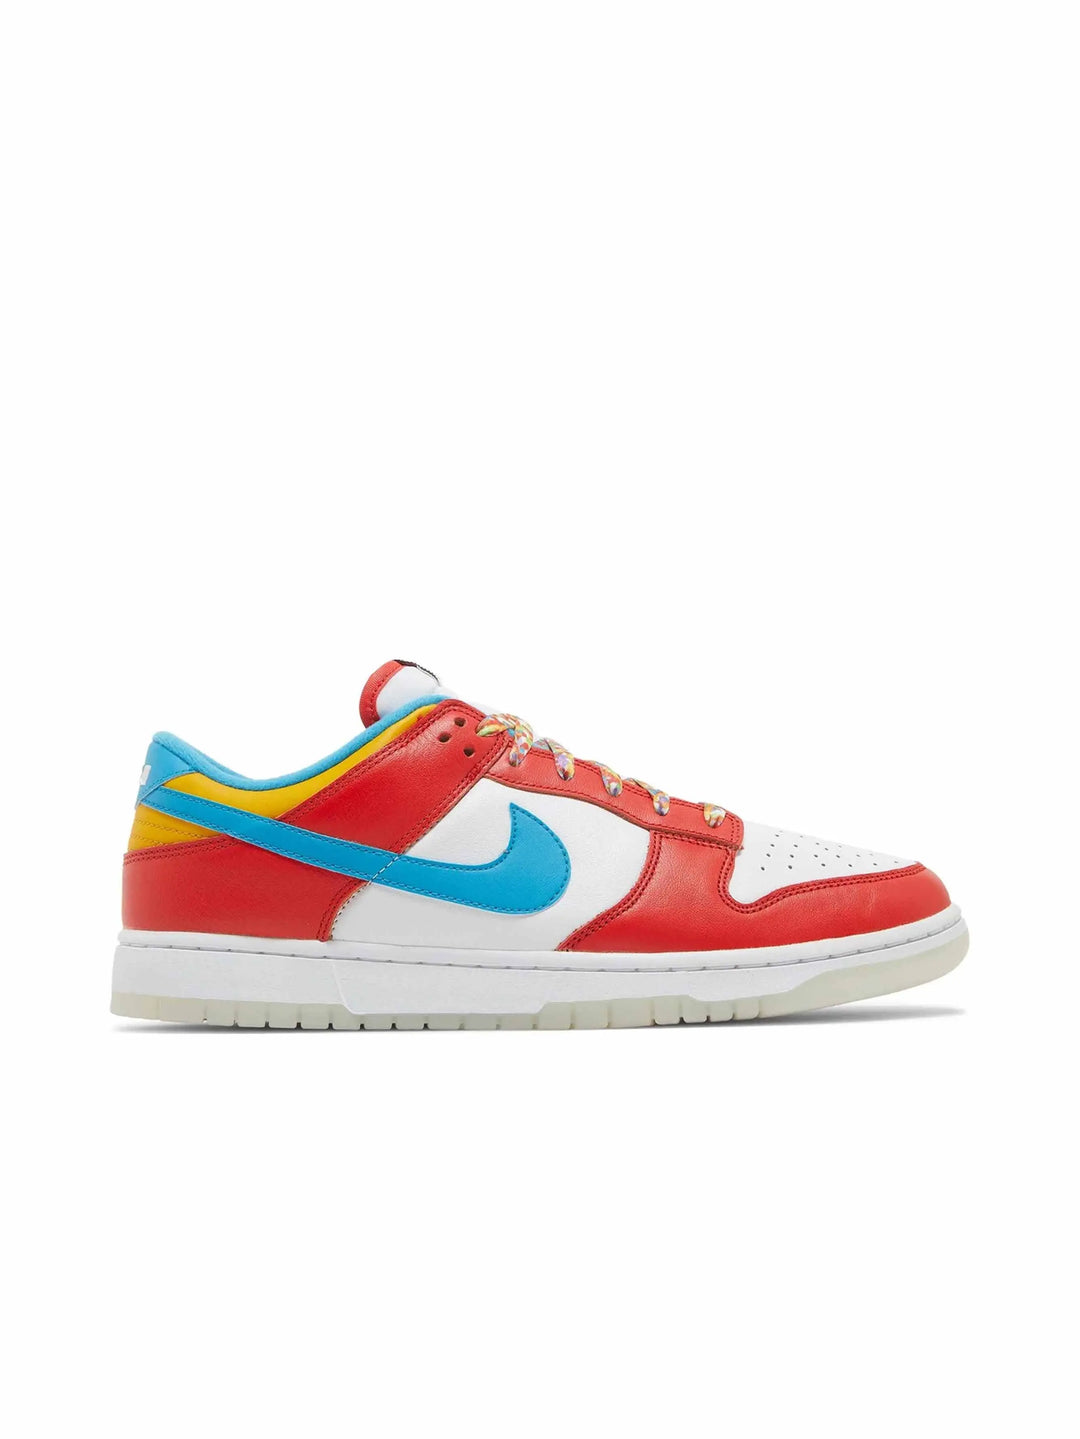 Nike Dunk Low QS LeBron James Fruity Pebbles in Auckland, New Zealand - Shop name